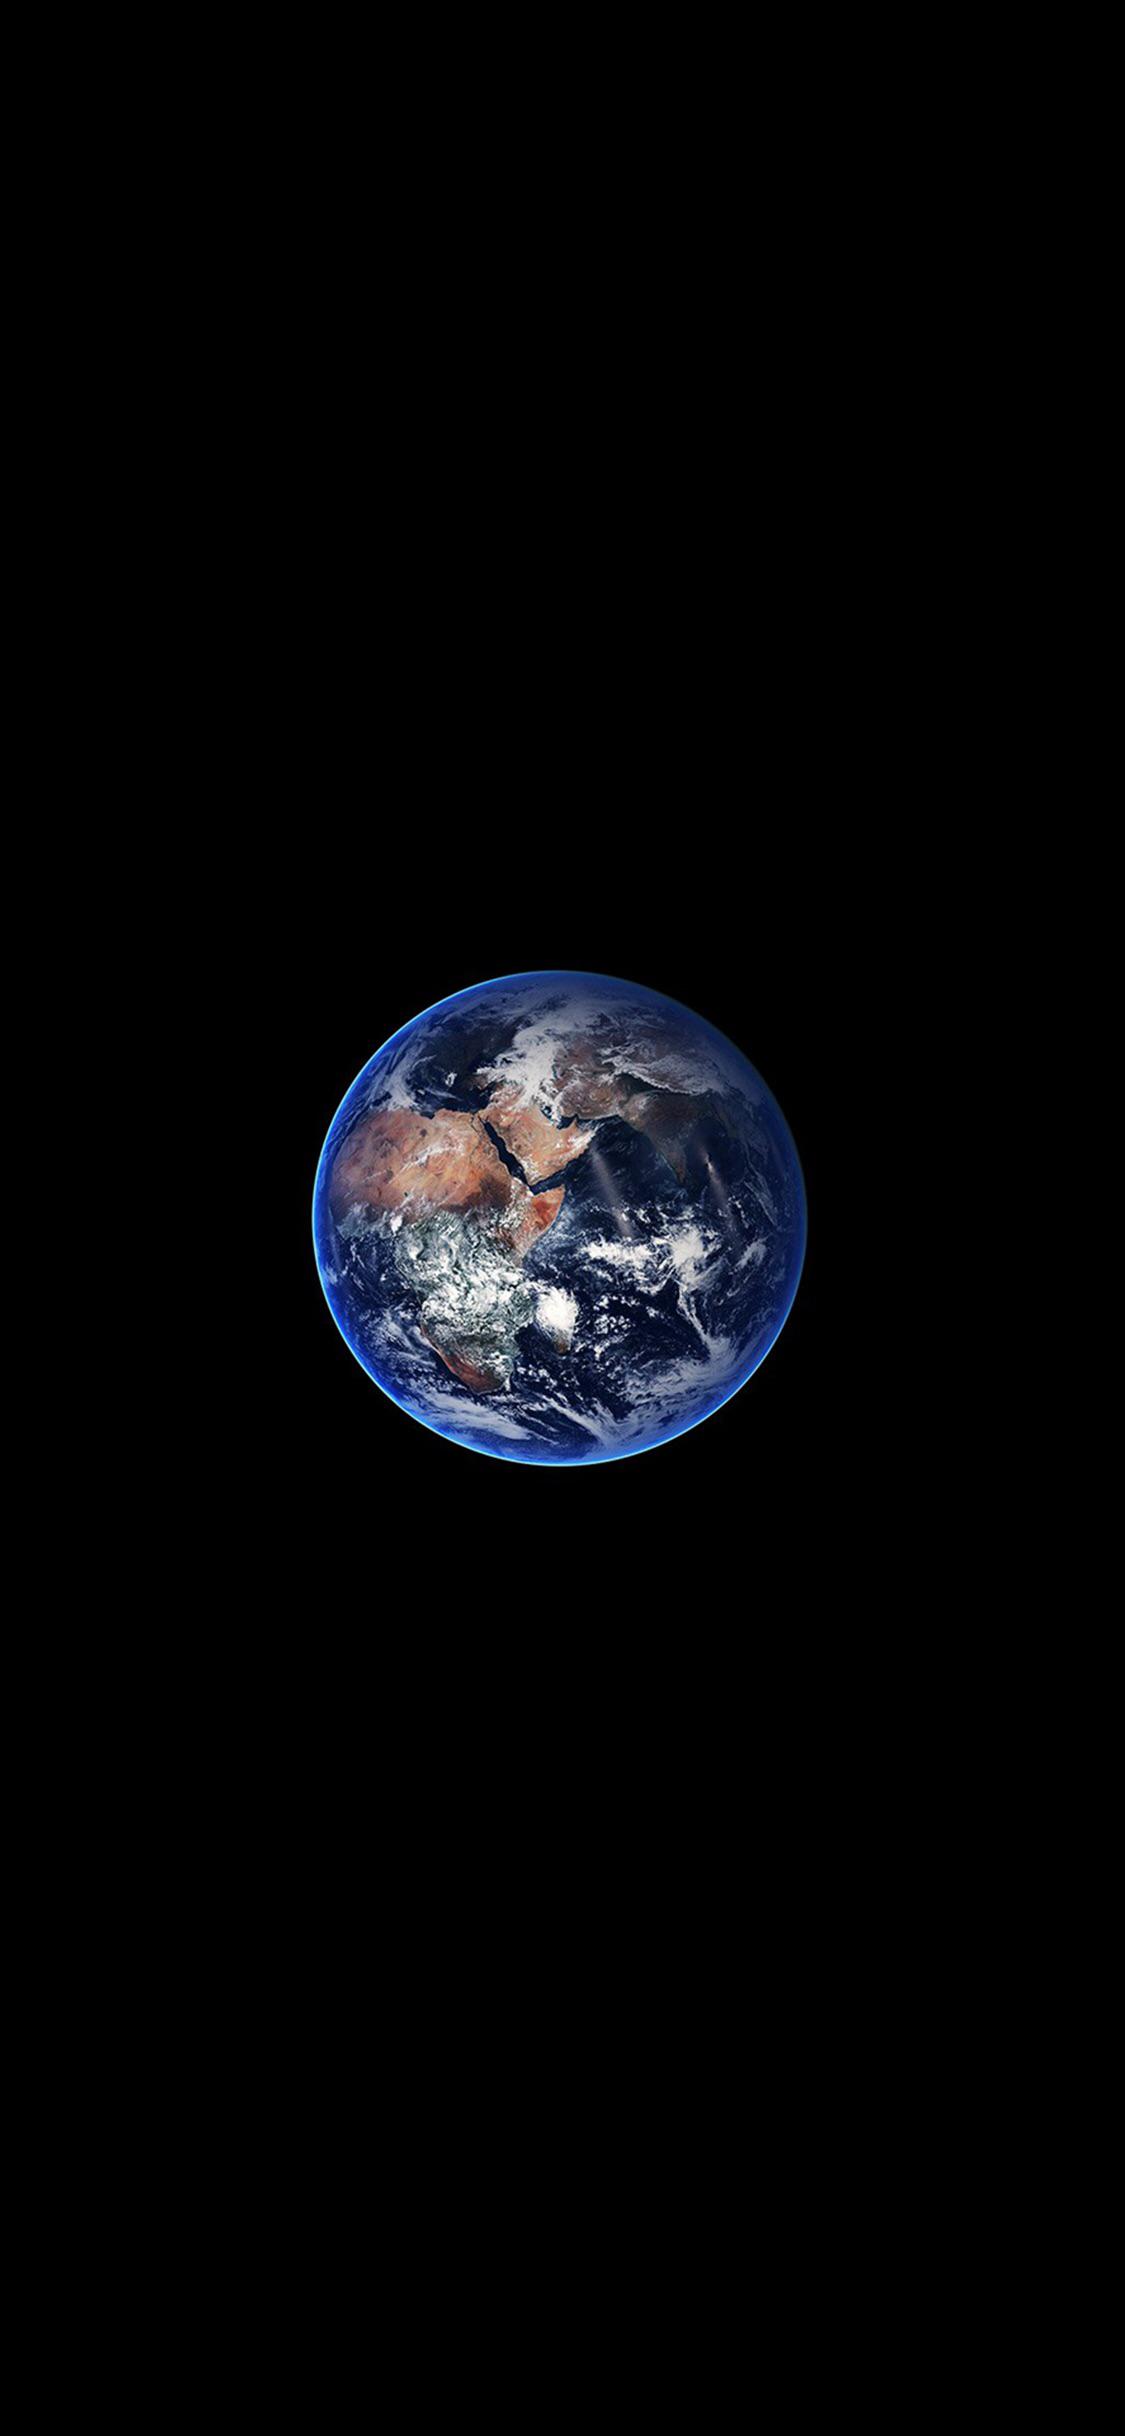 Earth Amoled Wallpaper For iPhone R iPhonewallpaper